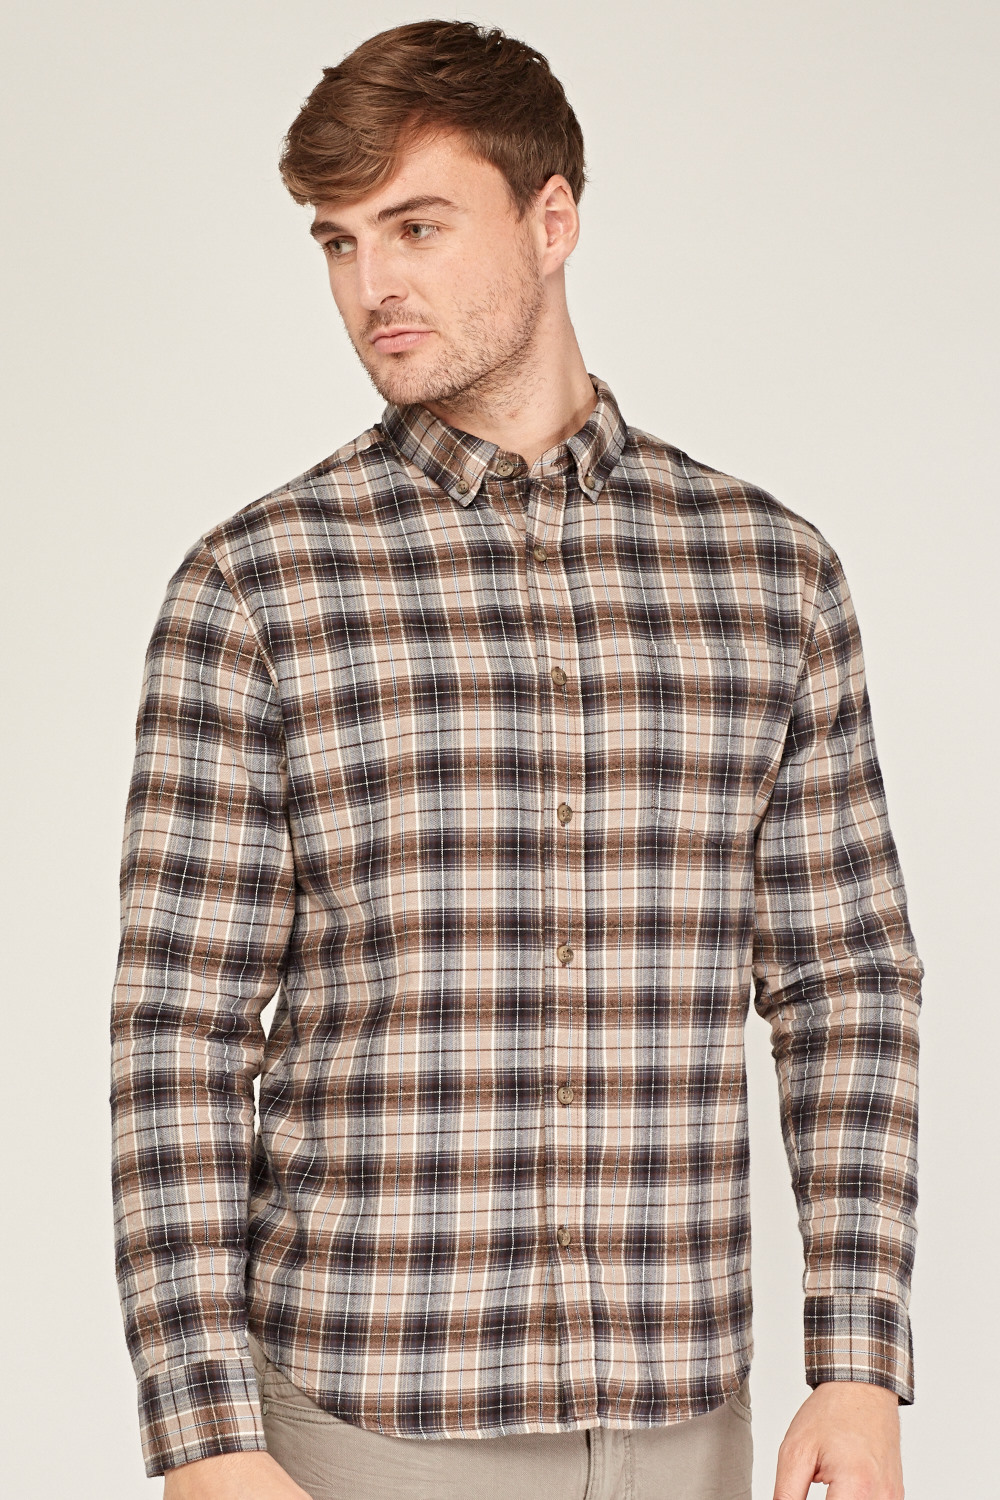 Gingham Checked Mens Shirt - Just $7